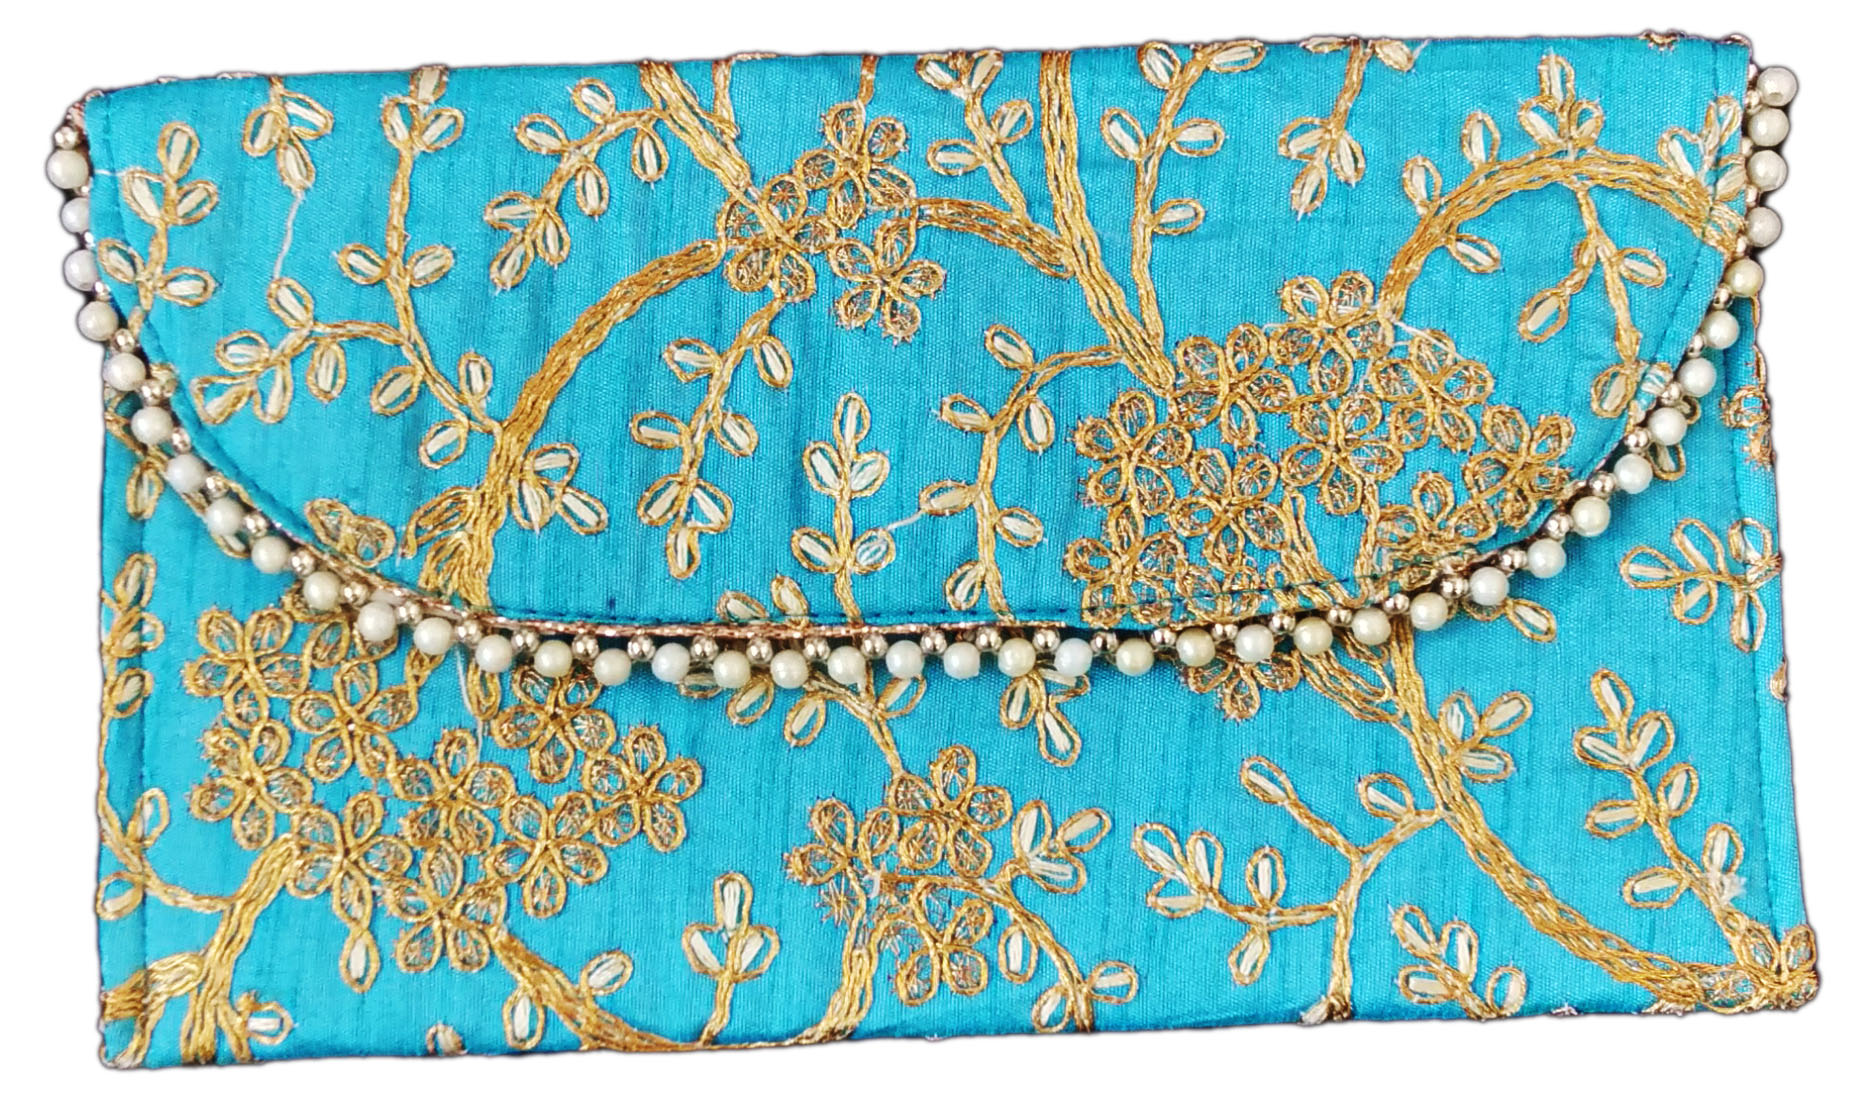 Buy NR by Nidhi Rathi Blue Fabric Clutch Online At Best Price @ Tata CLiQ